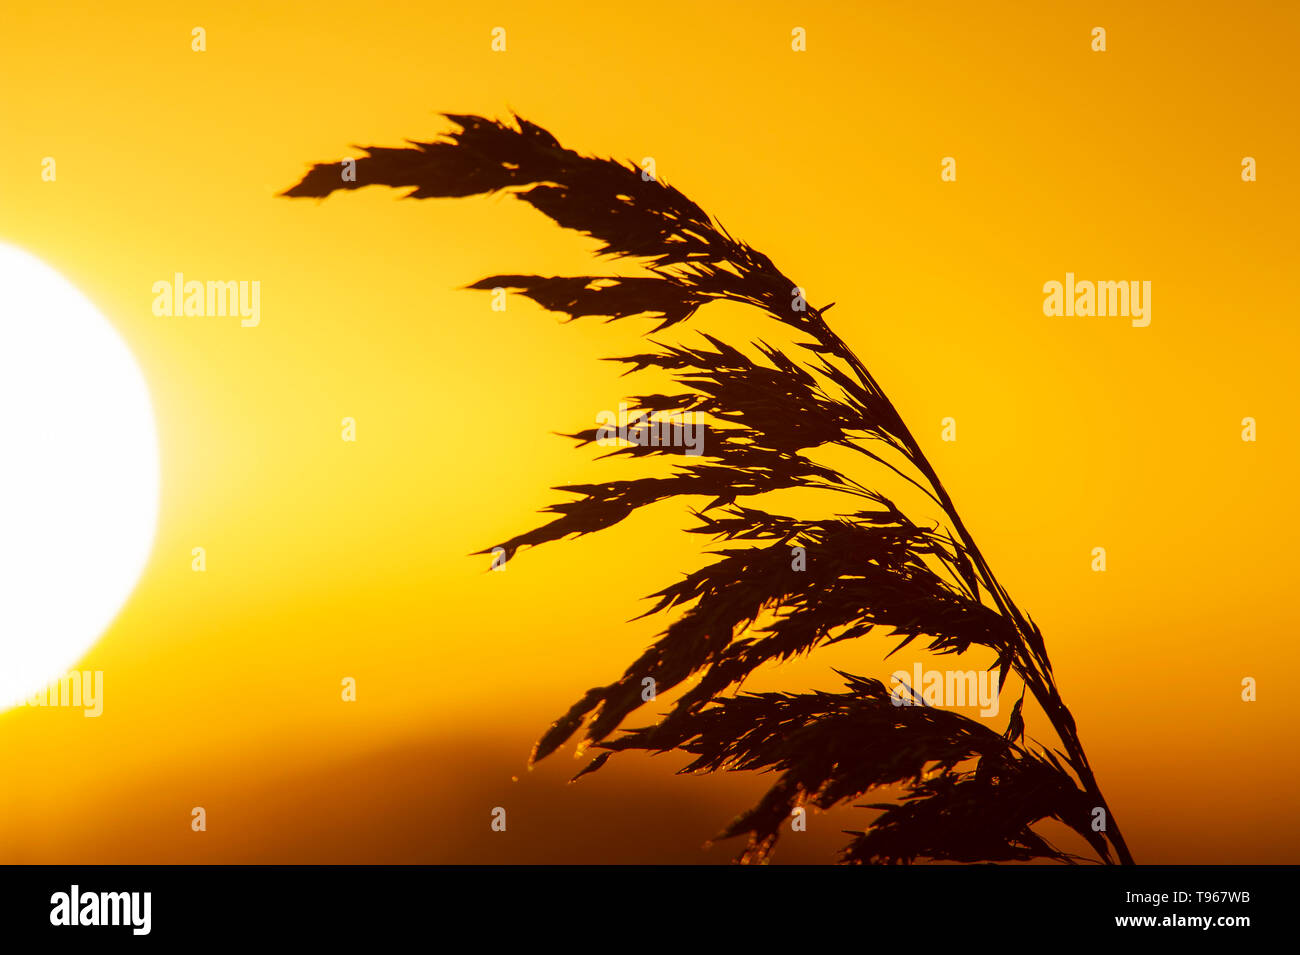 Common Reeds (Phragmites australis) silhouetted by the winter sun Stock Photo